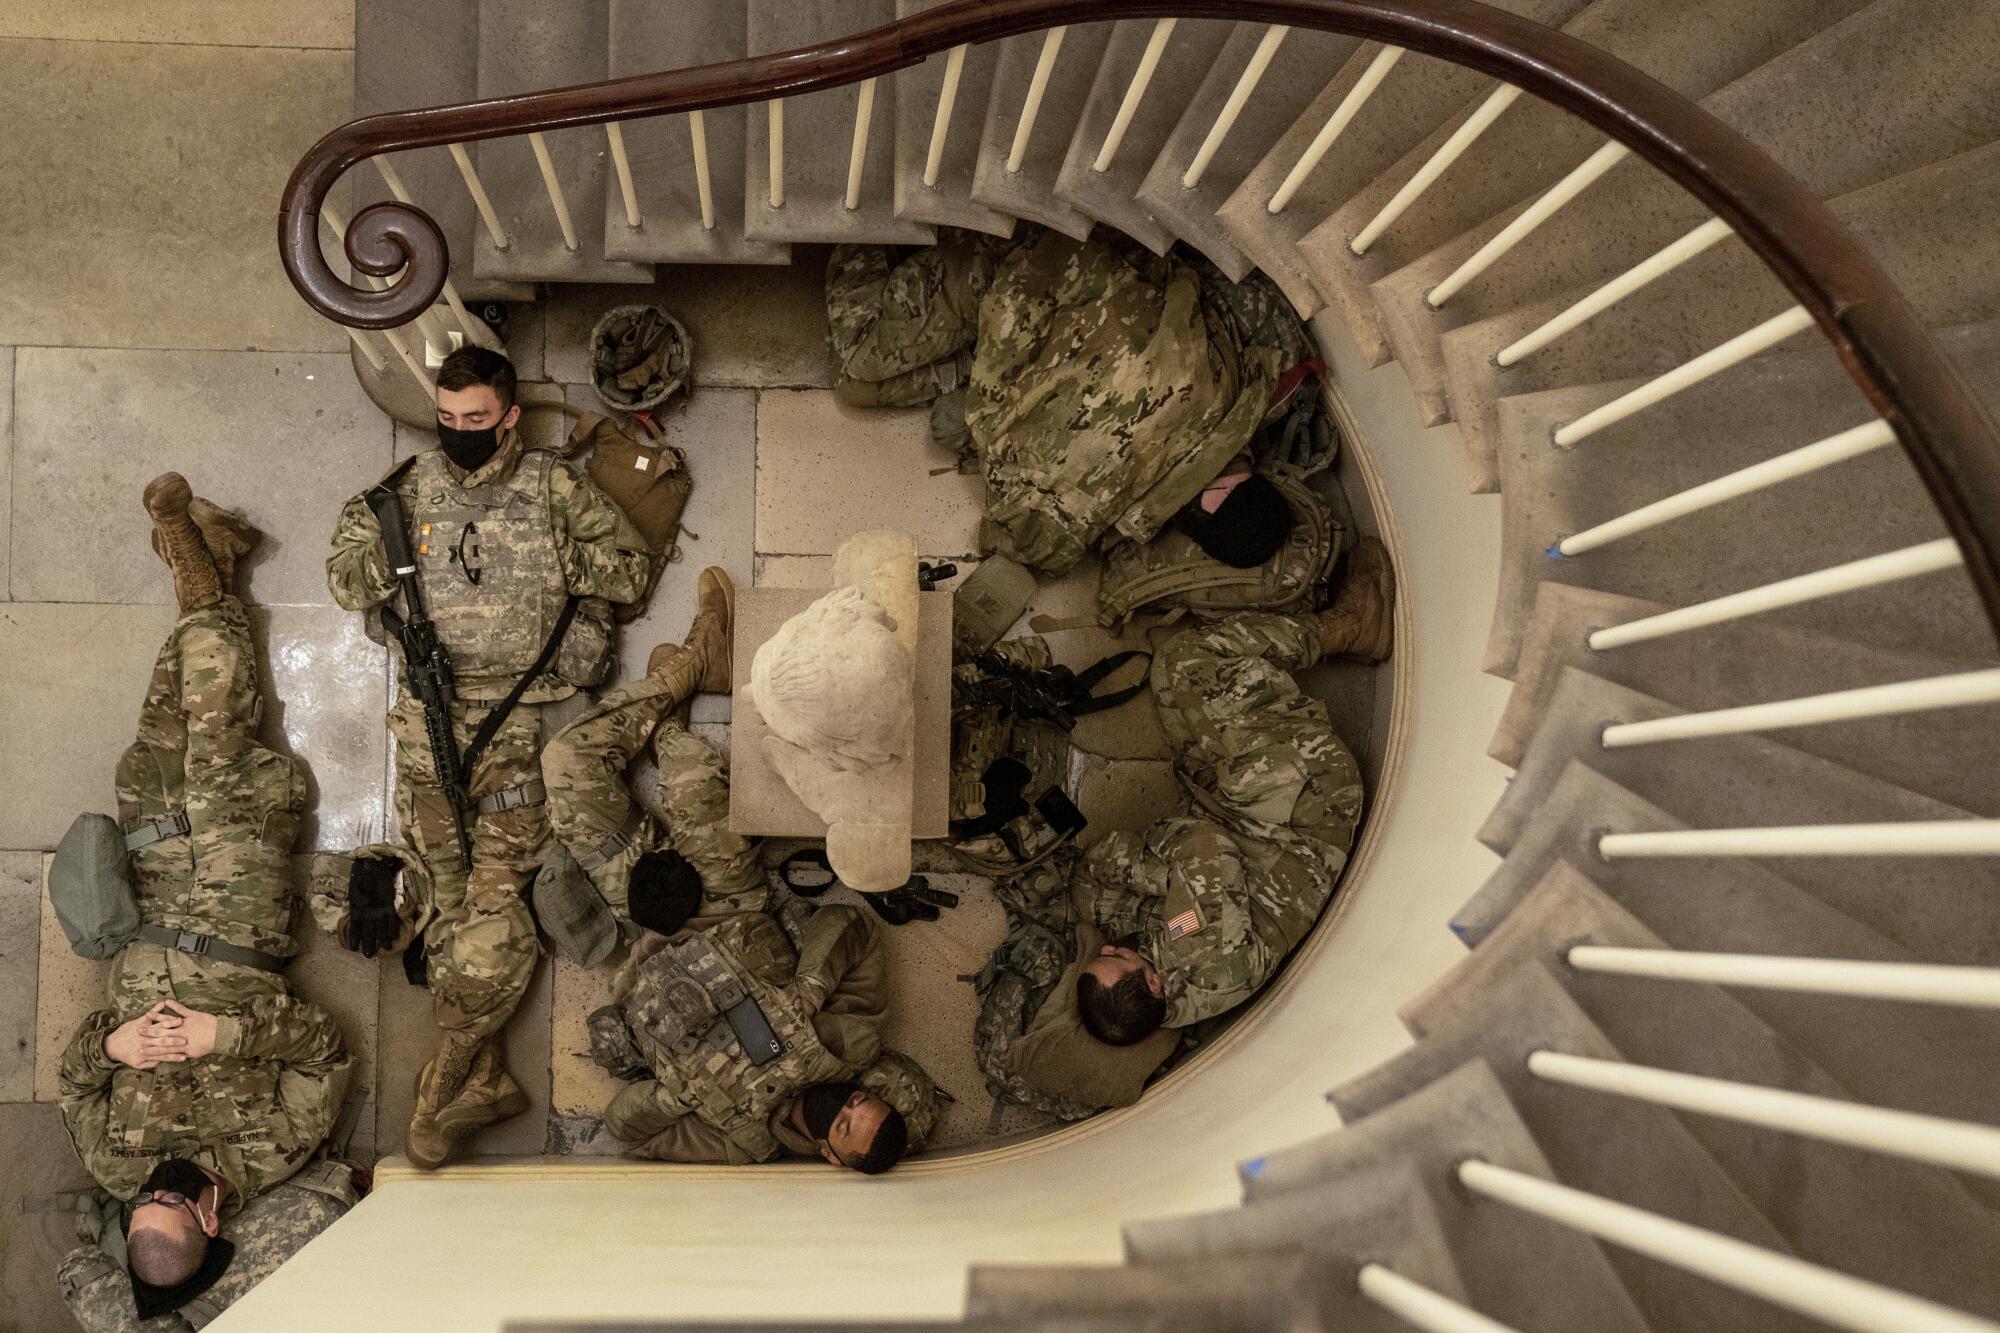 Members of the National Guard sleep in the halls of the U.S. Capitol.